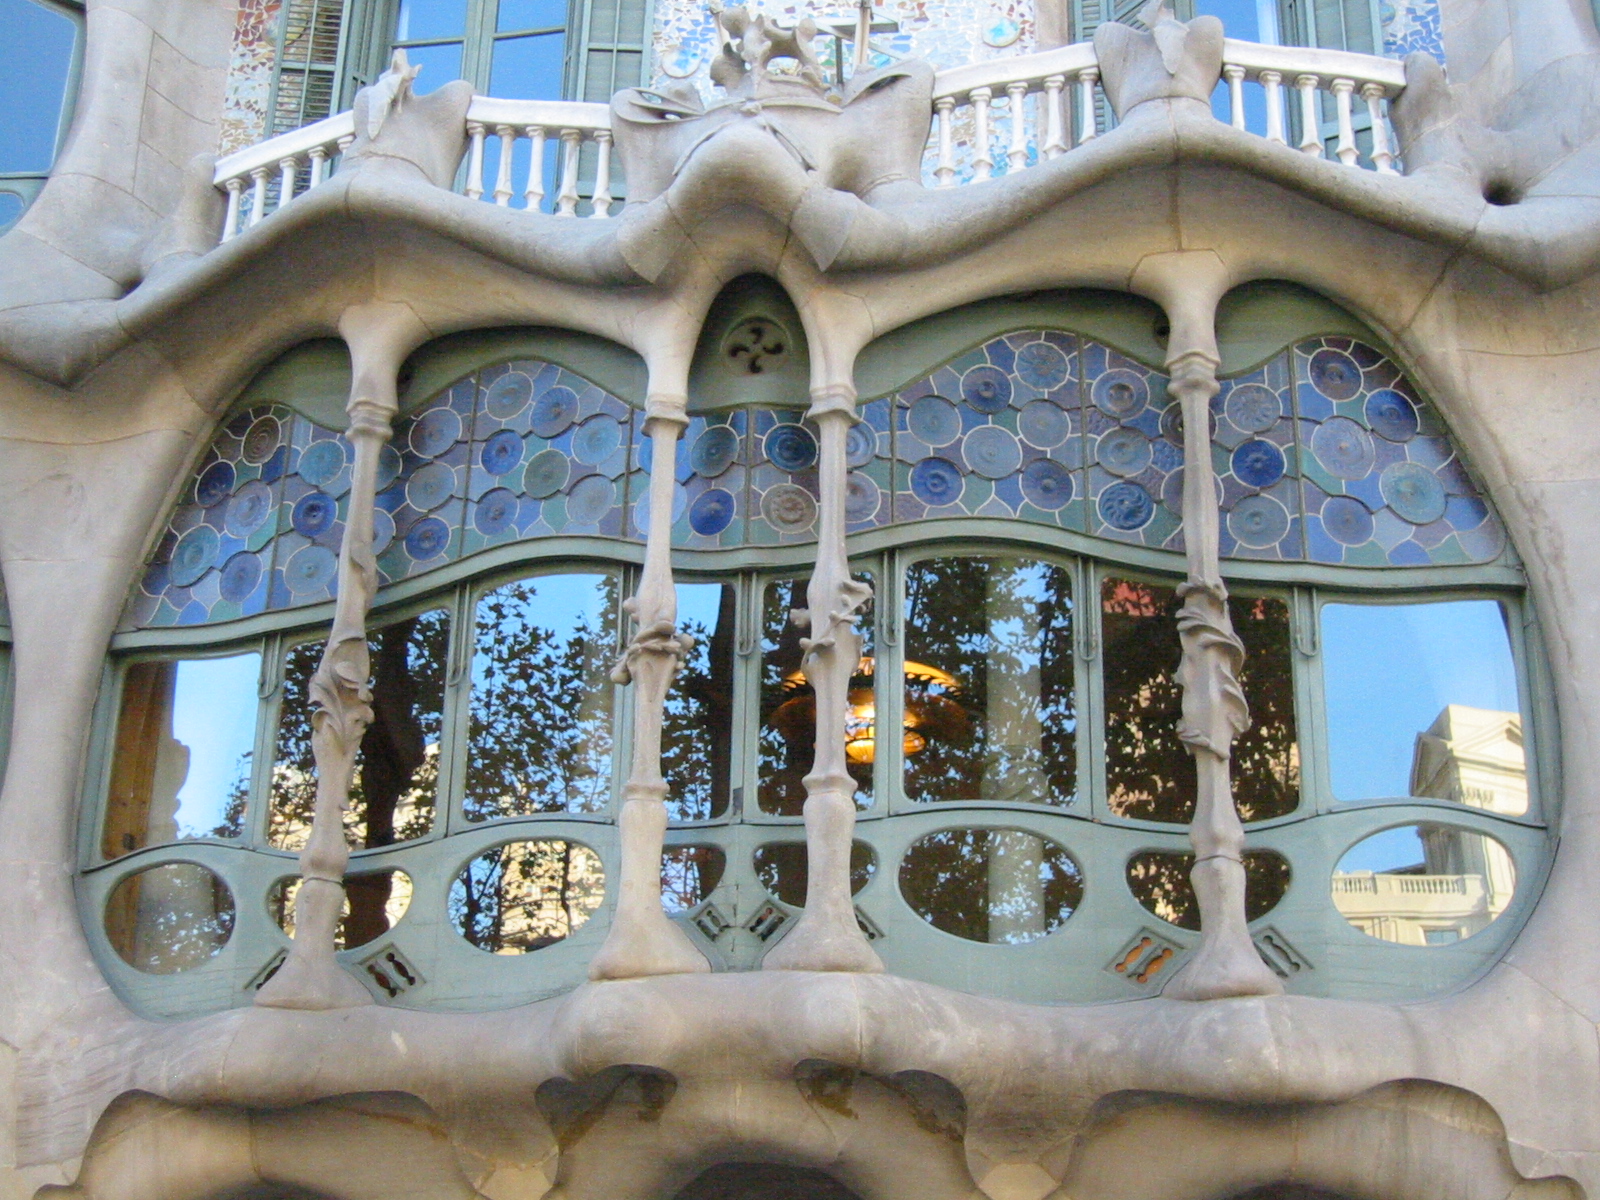 the windows have decorative designs and shapes on them